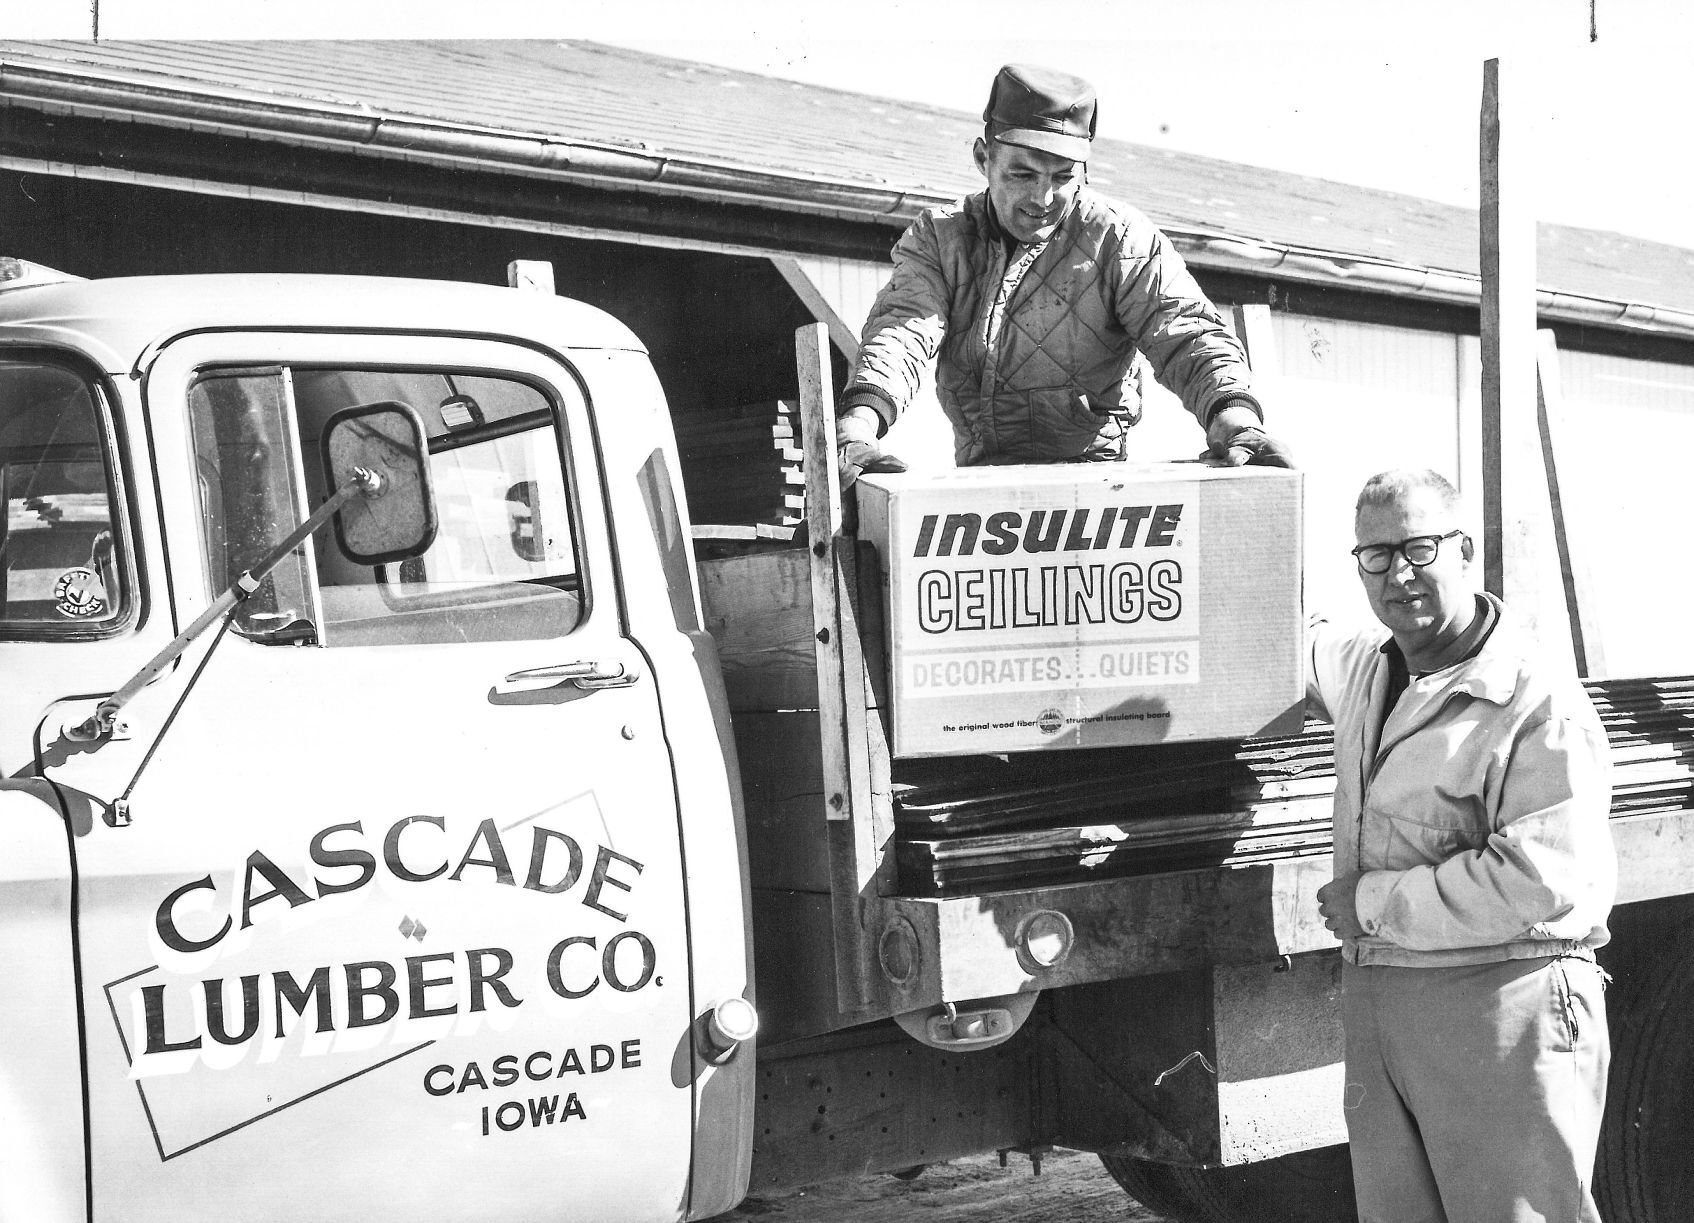 Cascade Lumber Co. in 1962.    PHOTO CREDIT: Contributed